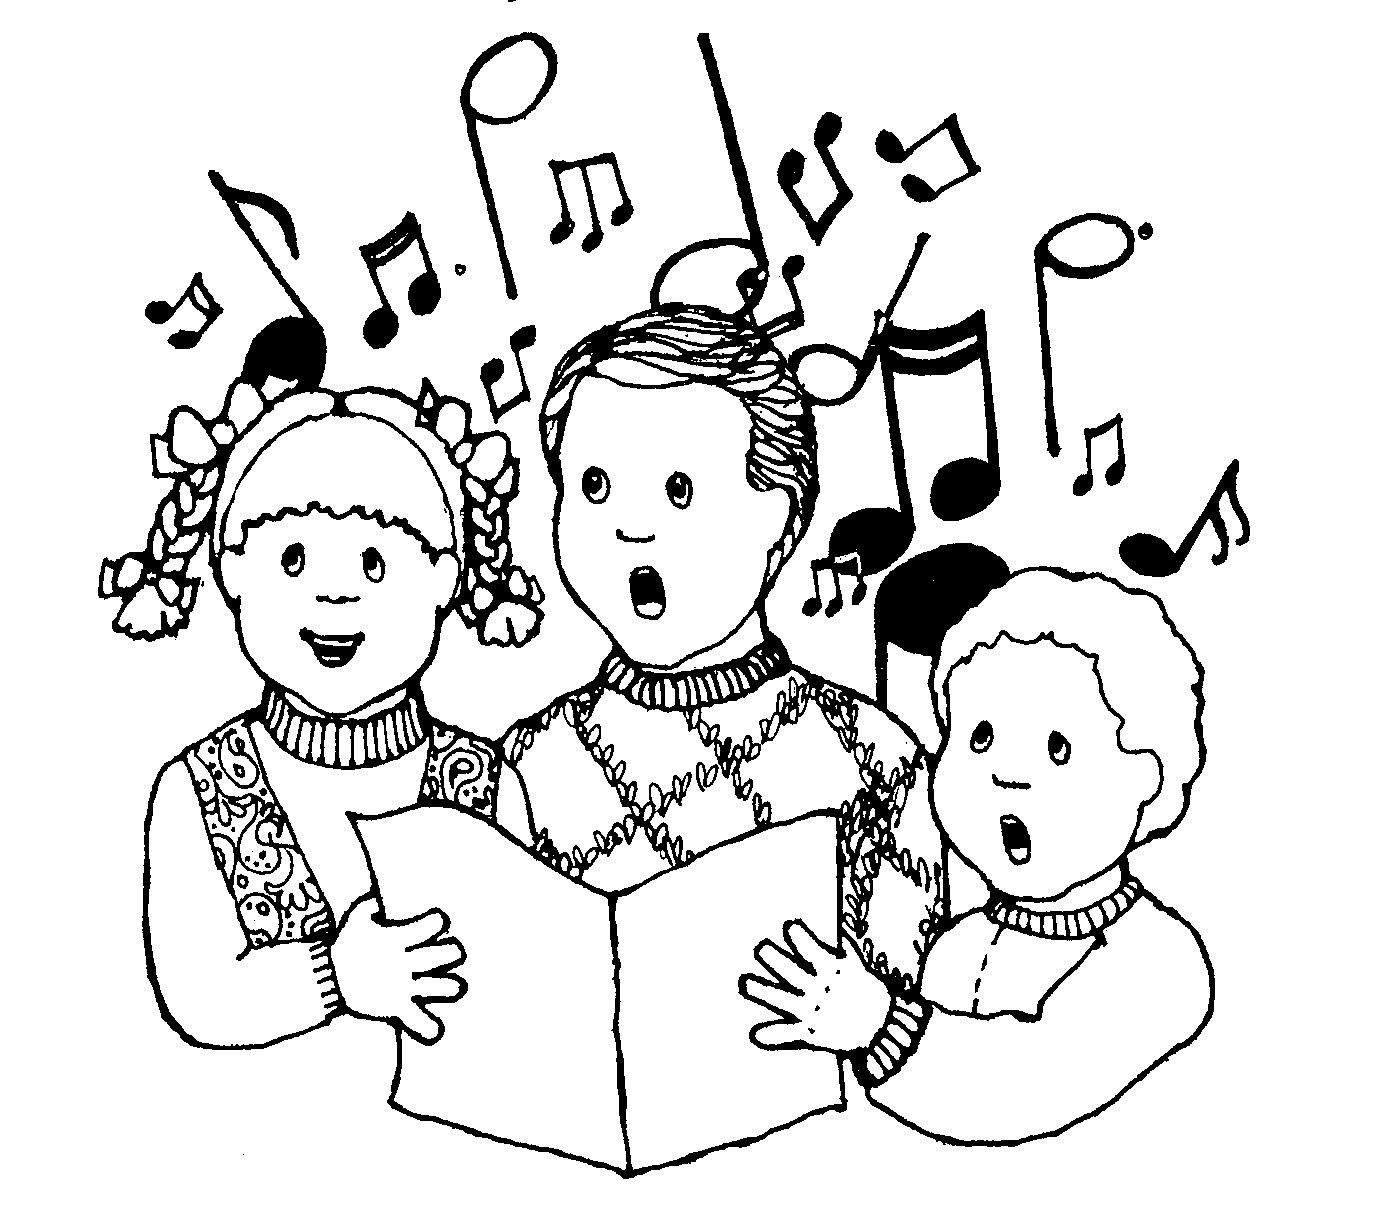 Free Kids Singing Clipart, Download Free Clip Art, Free Clip